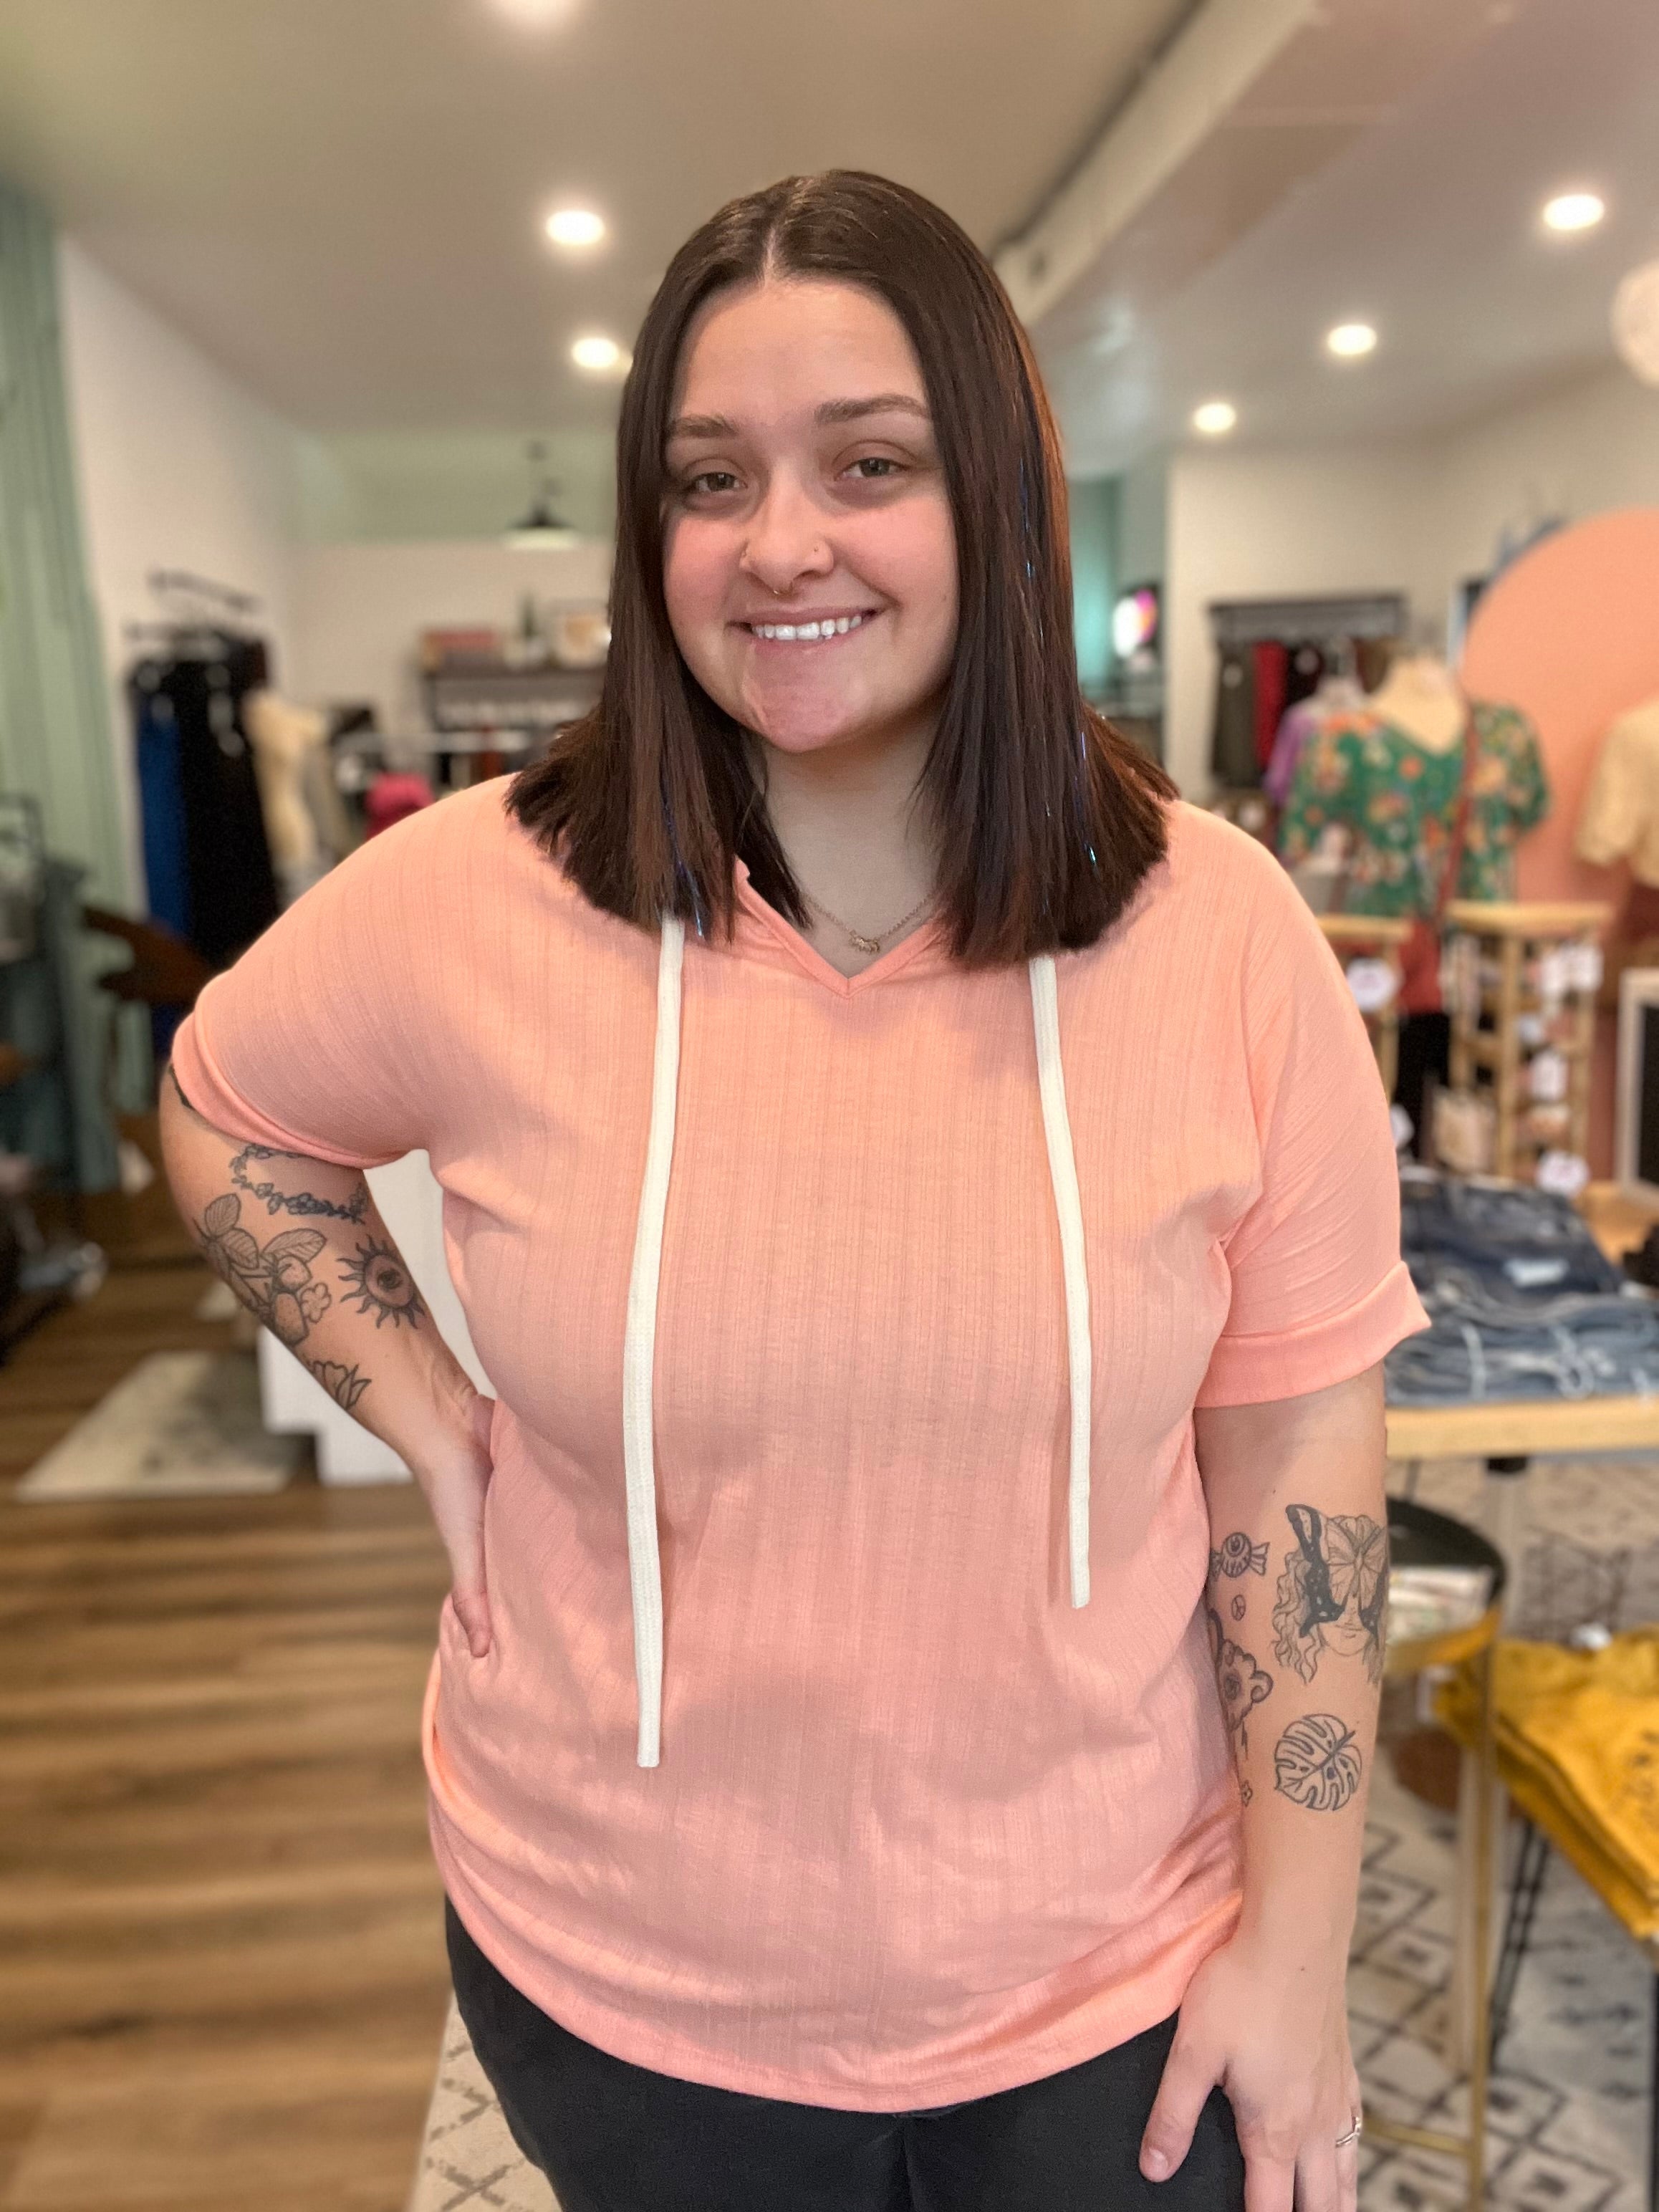 Shop Short Sleeve Hooded Tee - Coral-Shirts & Tops at Ruby Joy Boutique, a Women's Clothing Store in Pickerington, Ohio